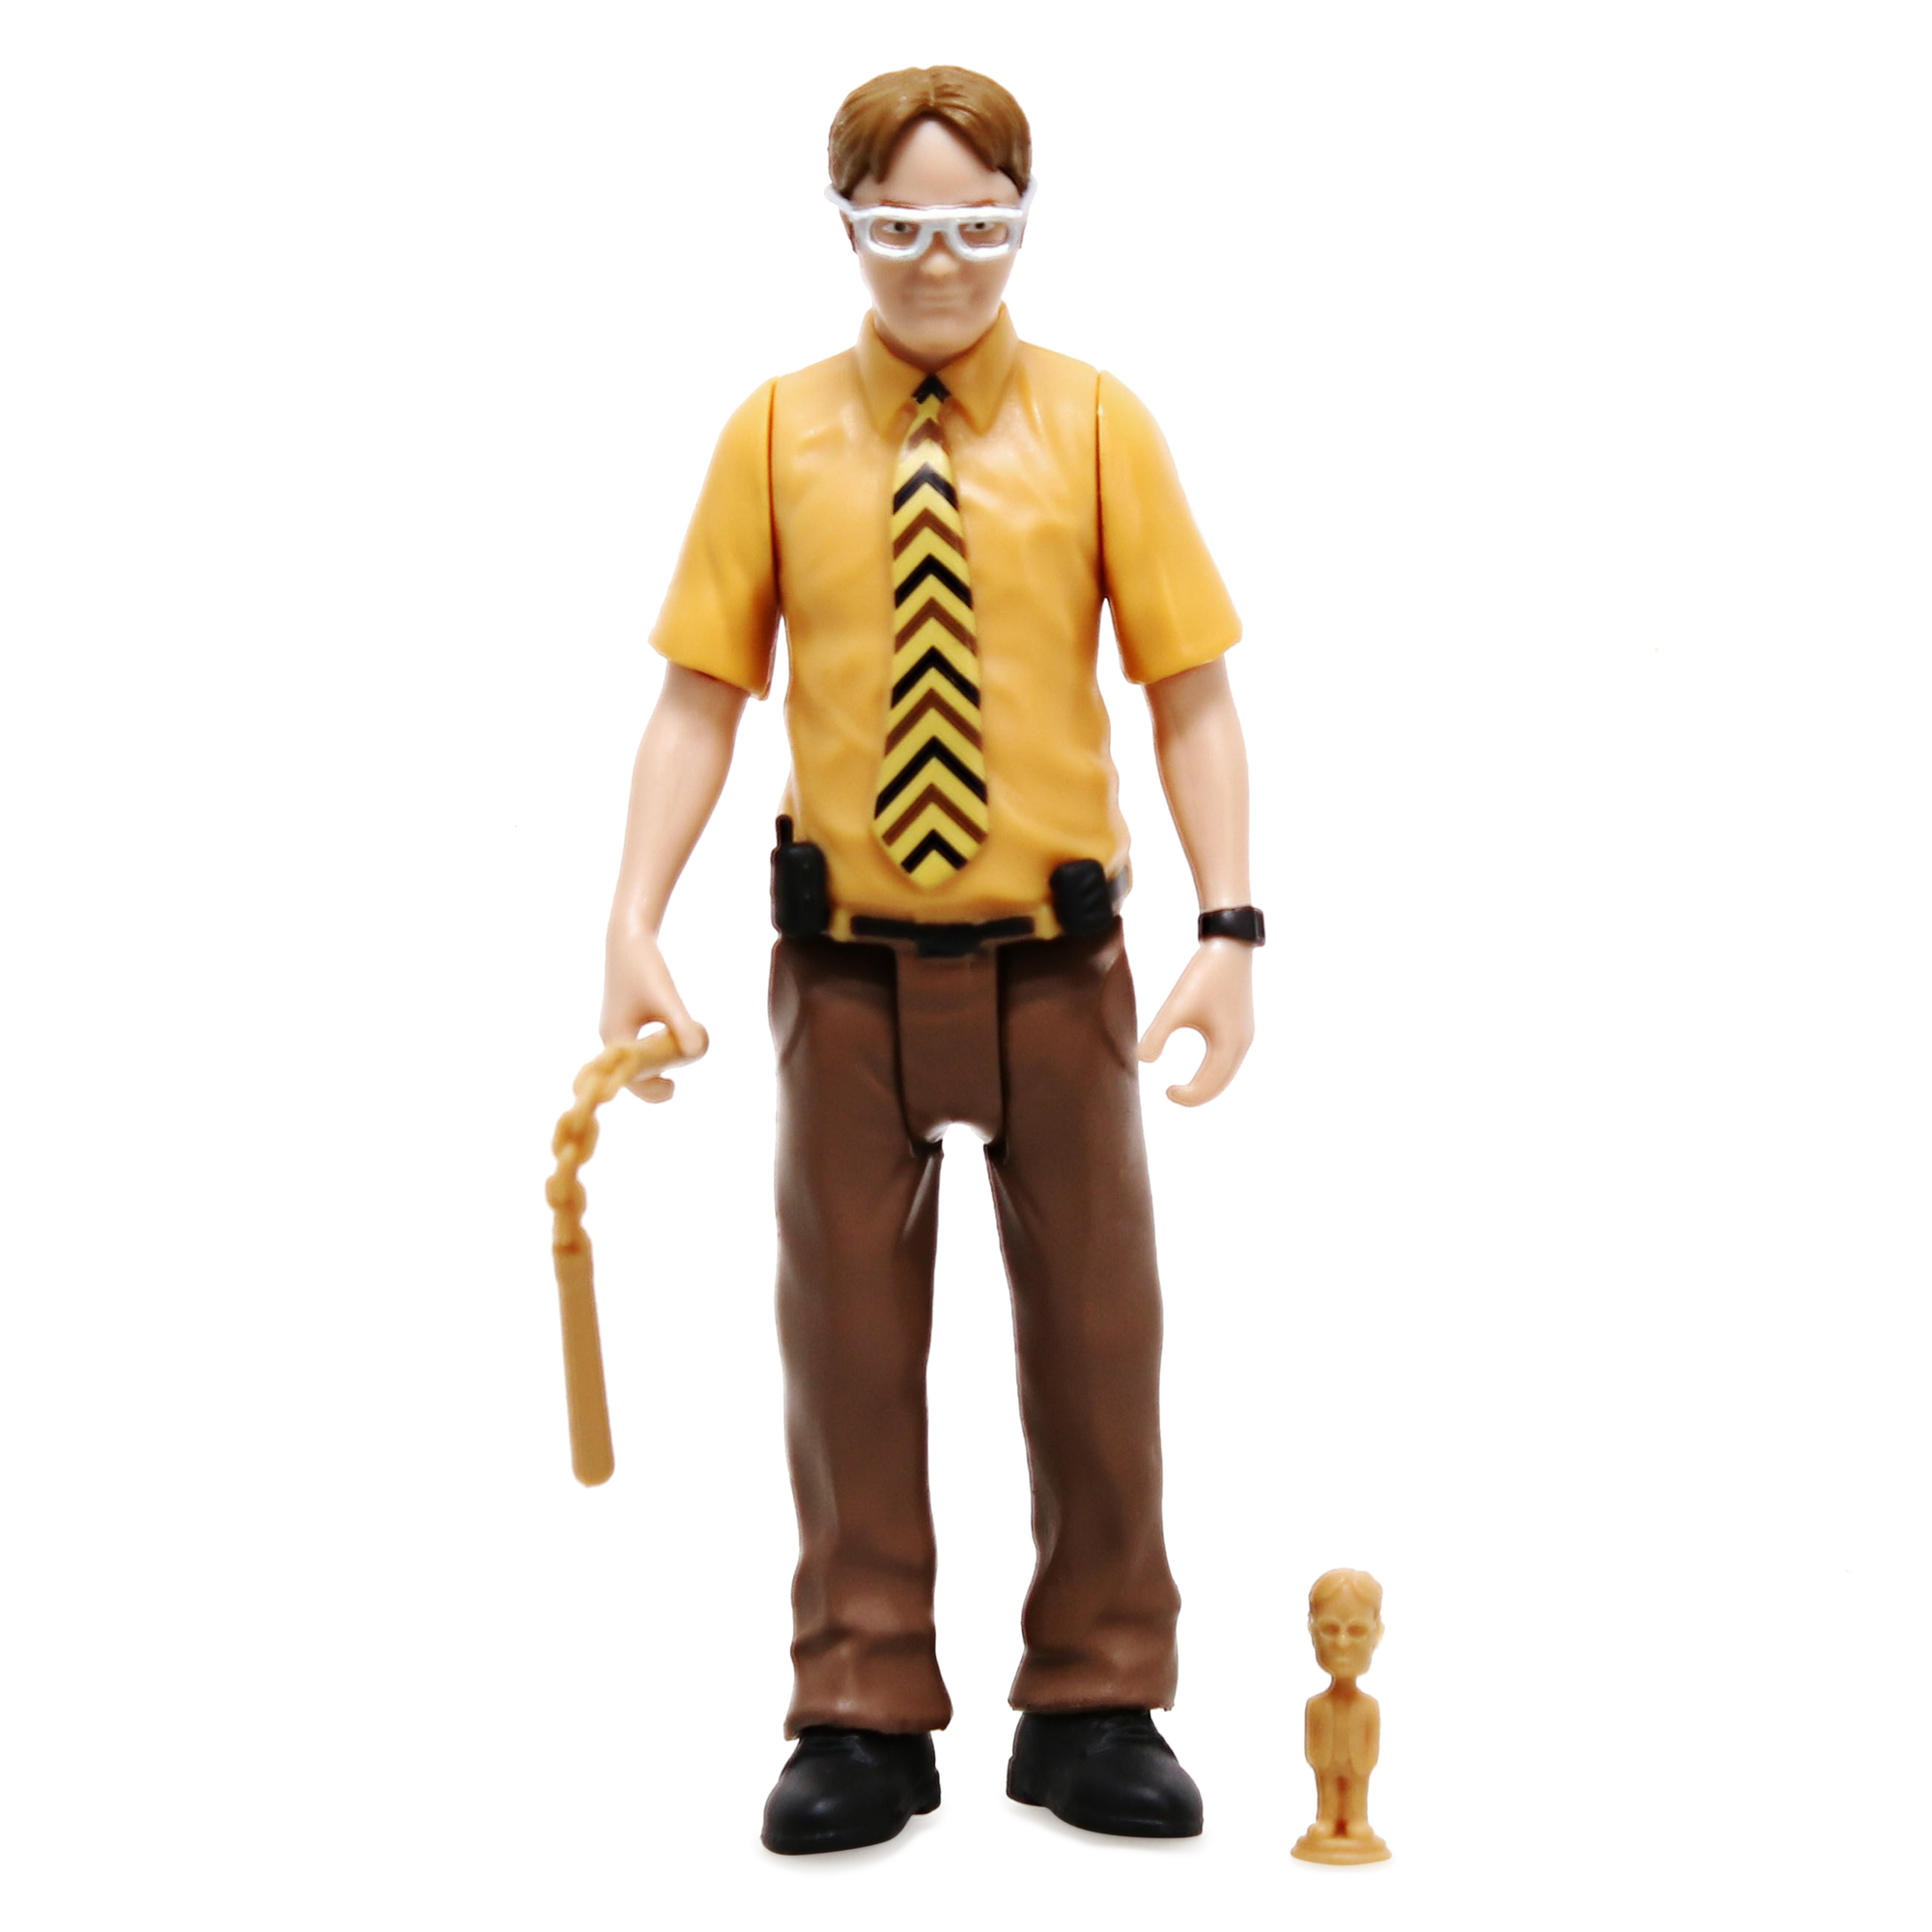 the office™ action figures 5in series 1